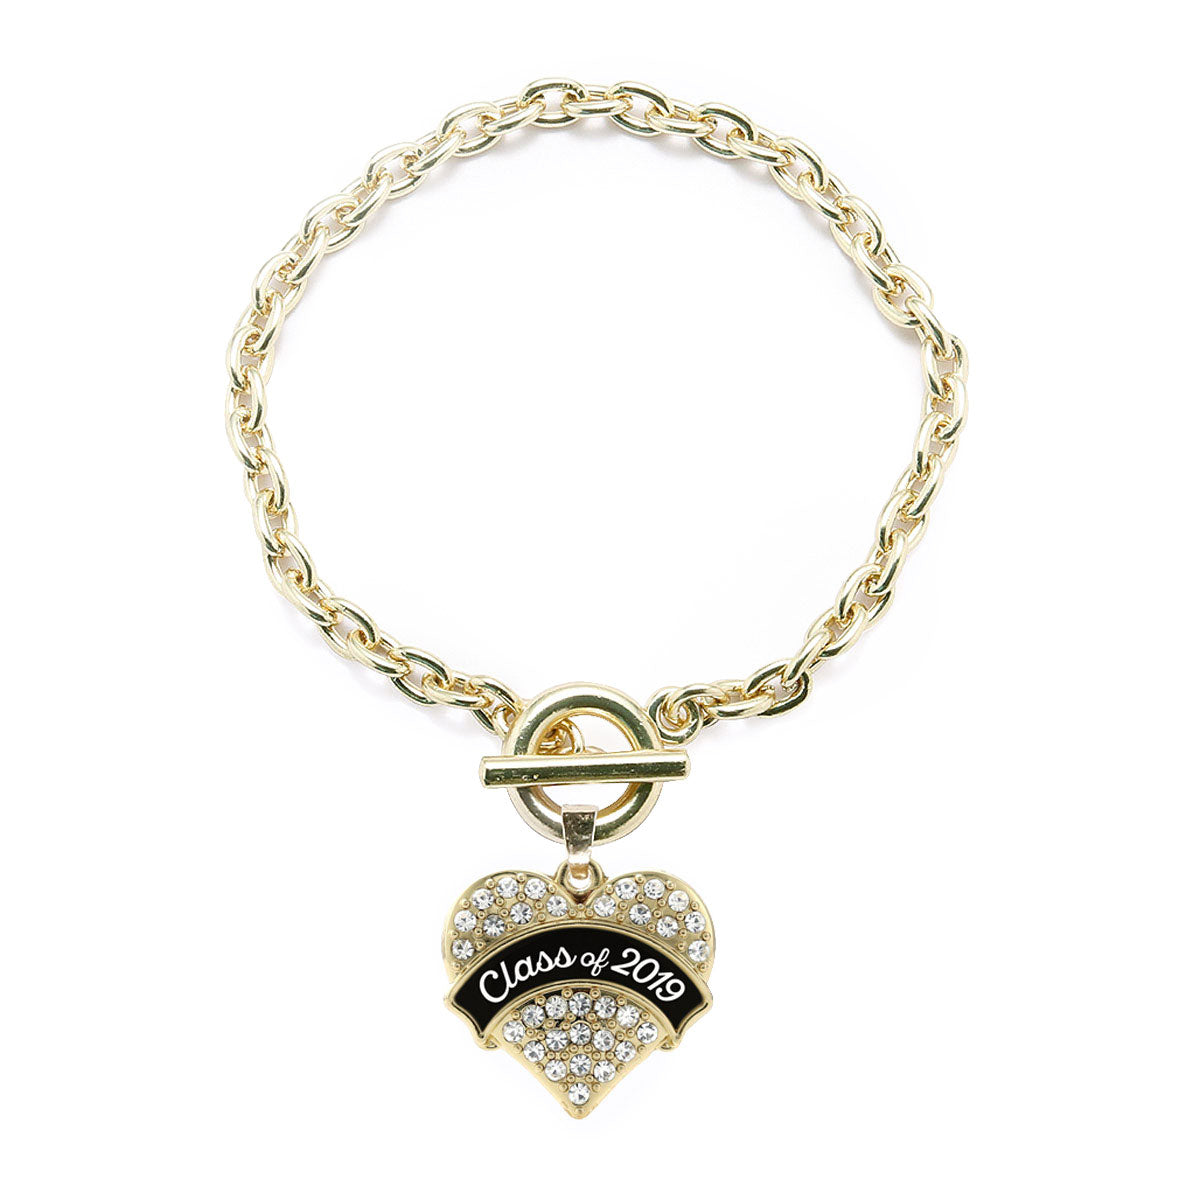 Gold Class of 2019 - Black and White Pave Heart Charm Toggle Bracelet